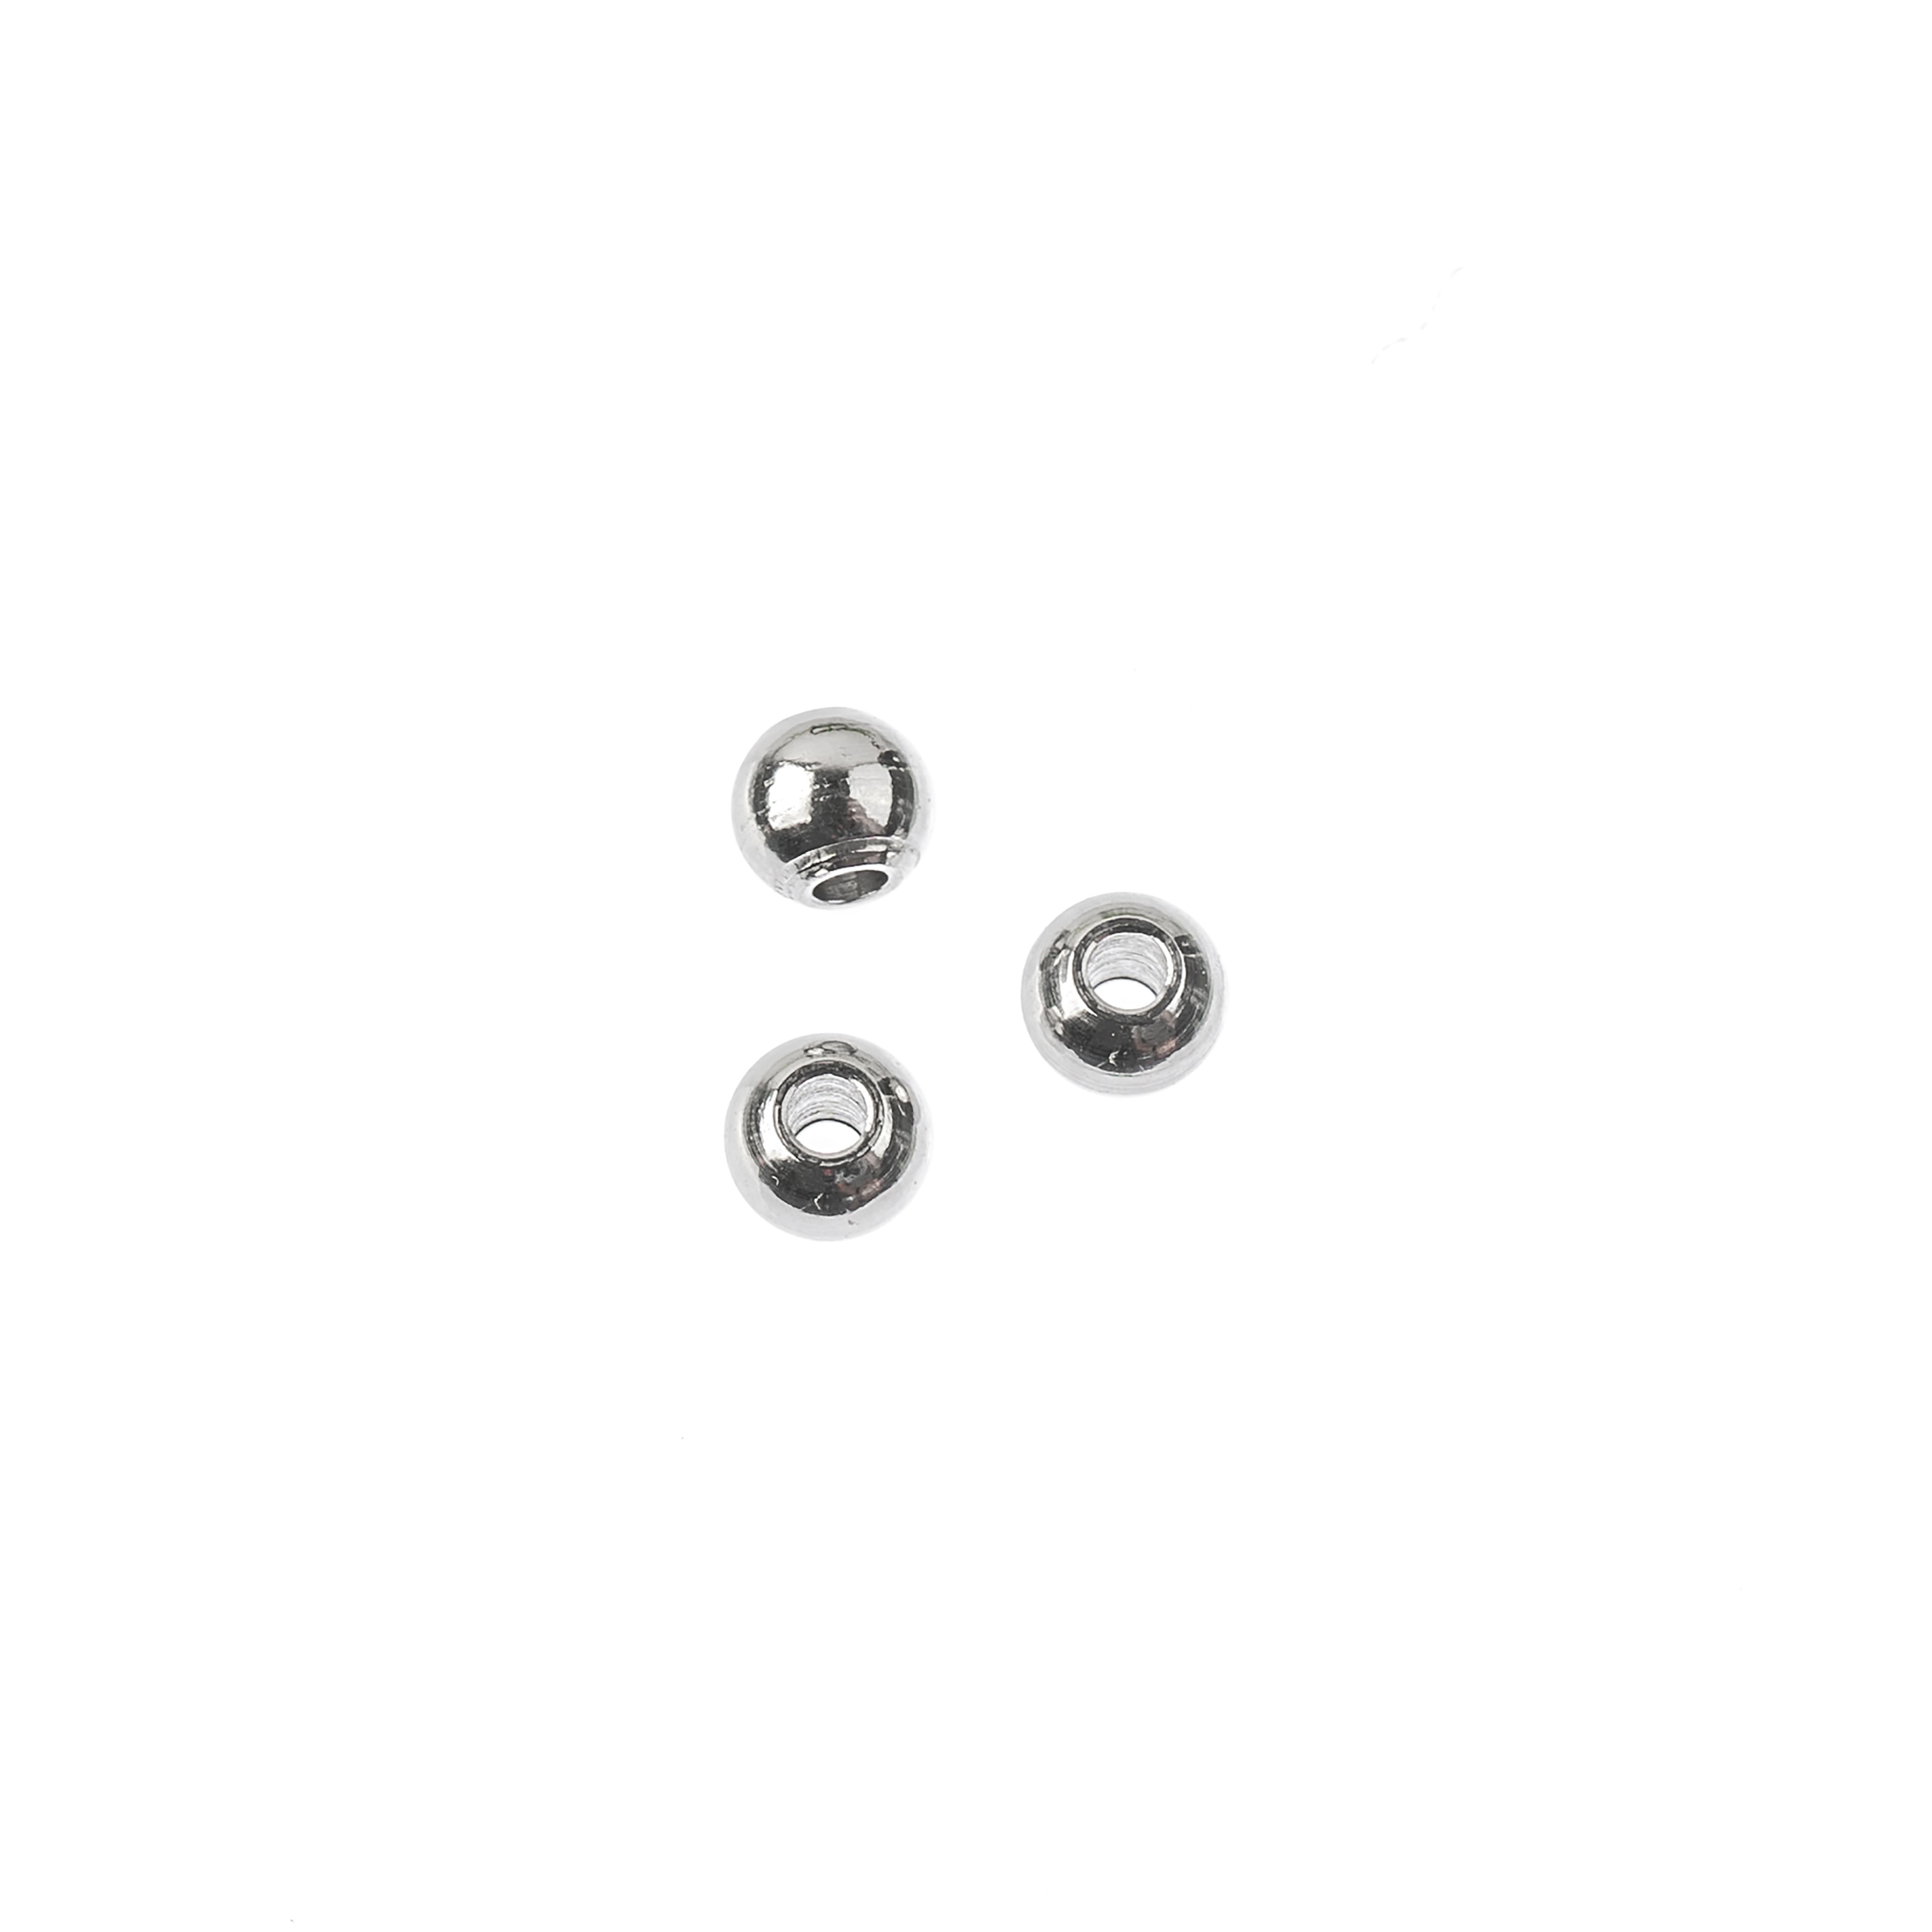 3mm Spacer Beads by Bead Landing™